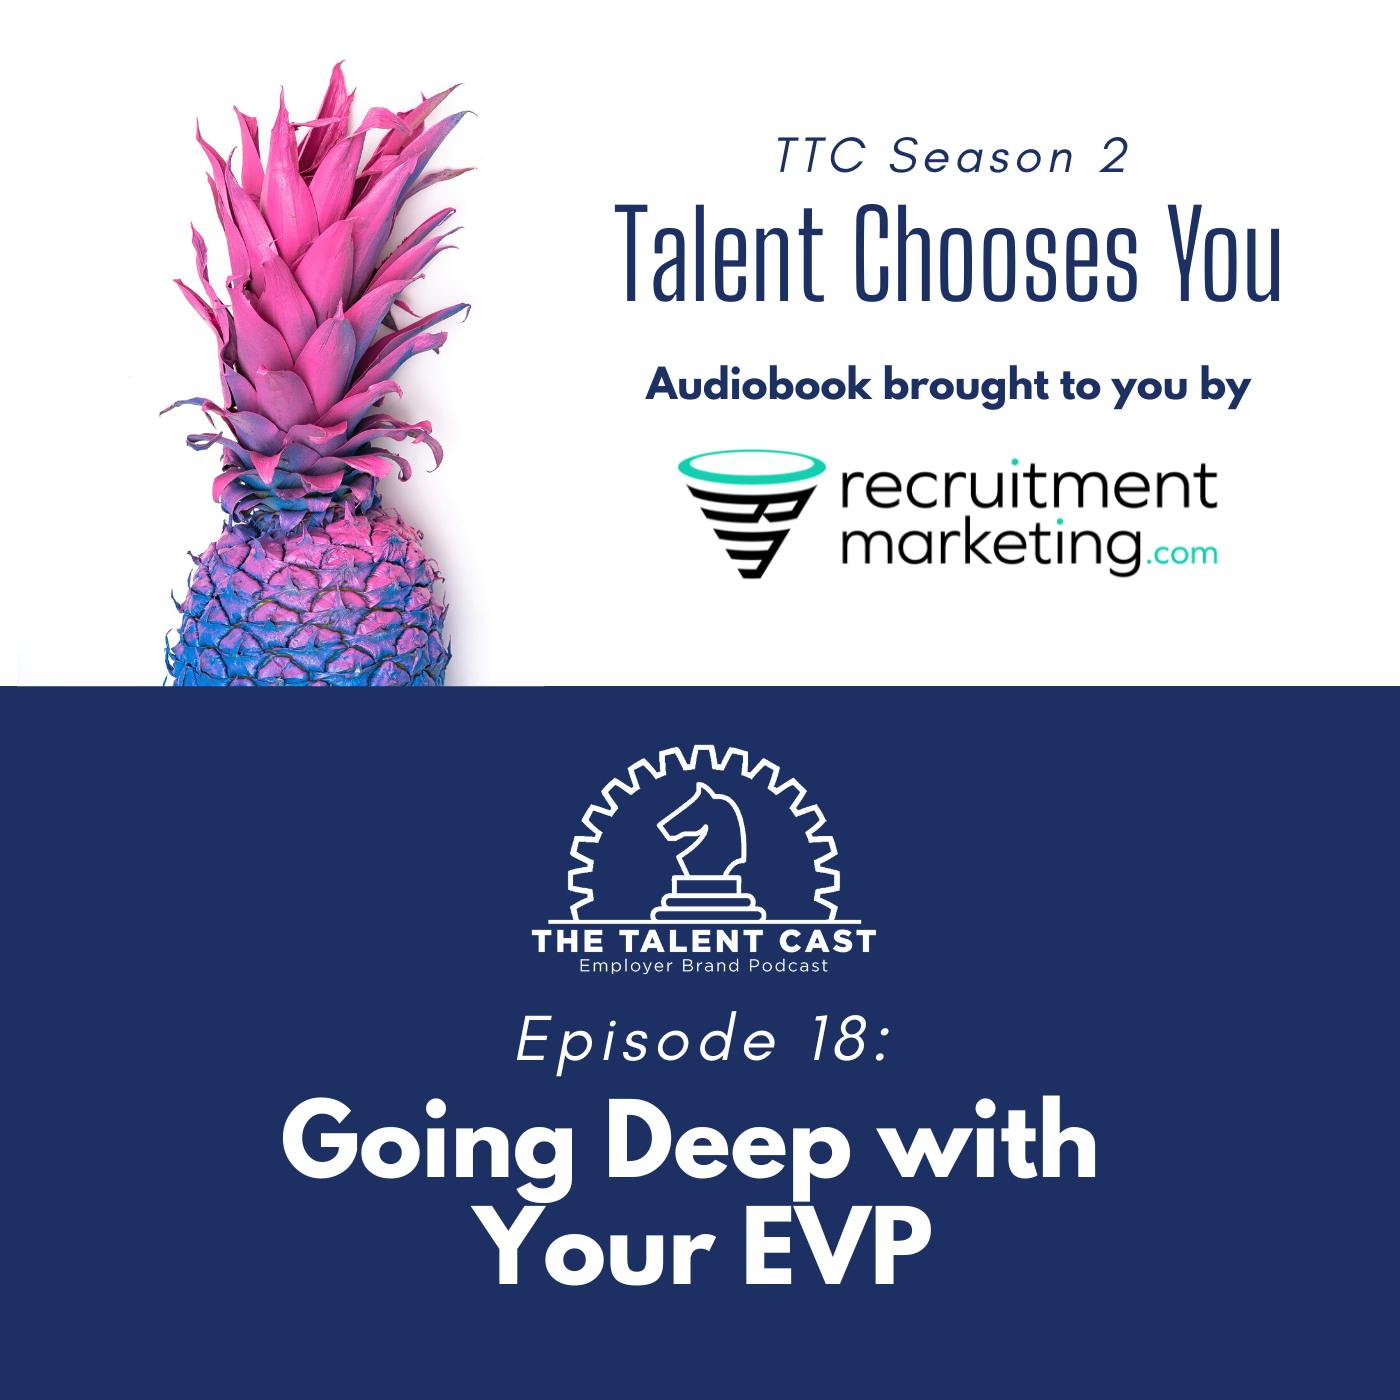 Going Deep with your EVP